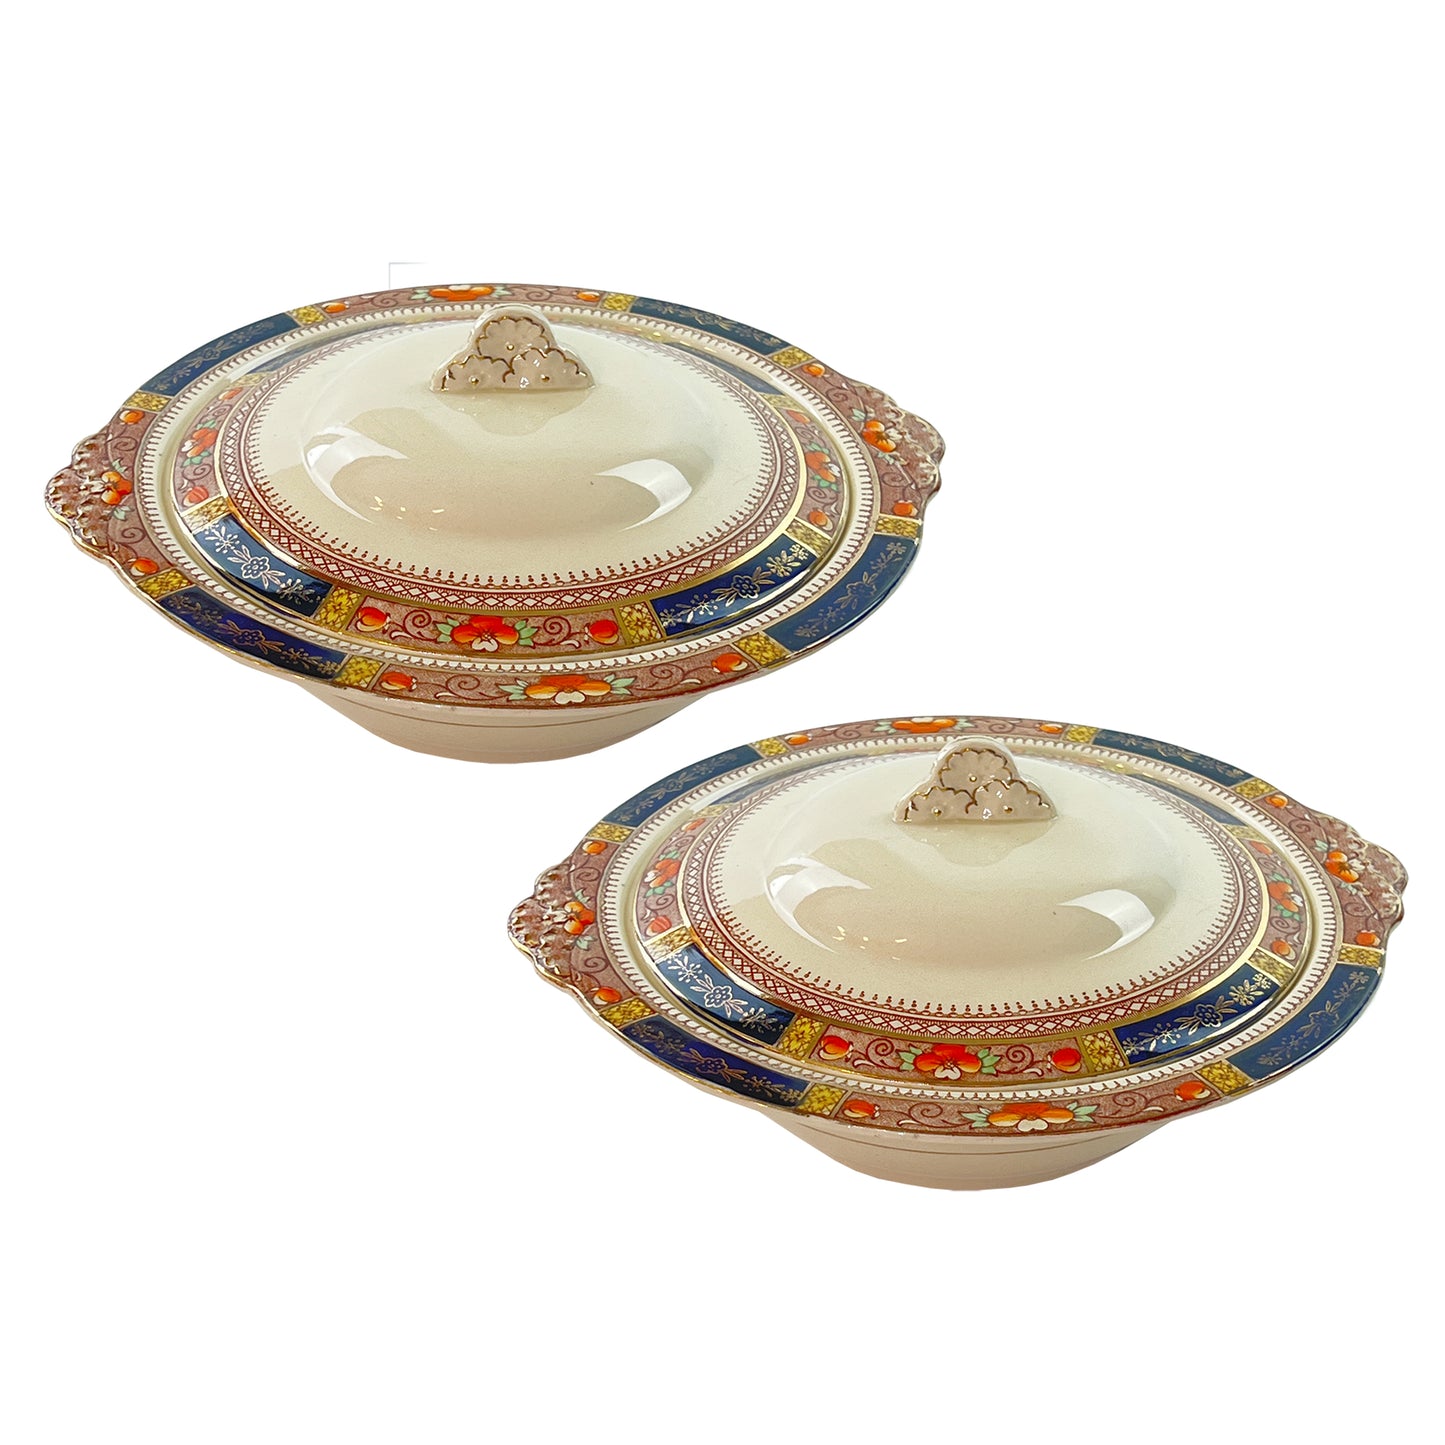 Queen-Mary-Sol-10.5-inch-Round-Vegetable-Bowls-by-J.G.-Meakin.-Shop-eBargainsAndDeals.com